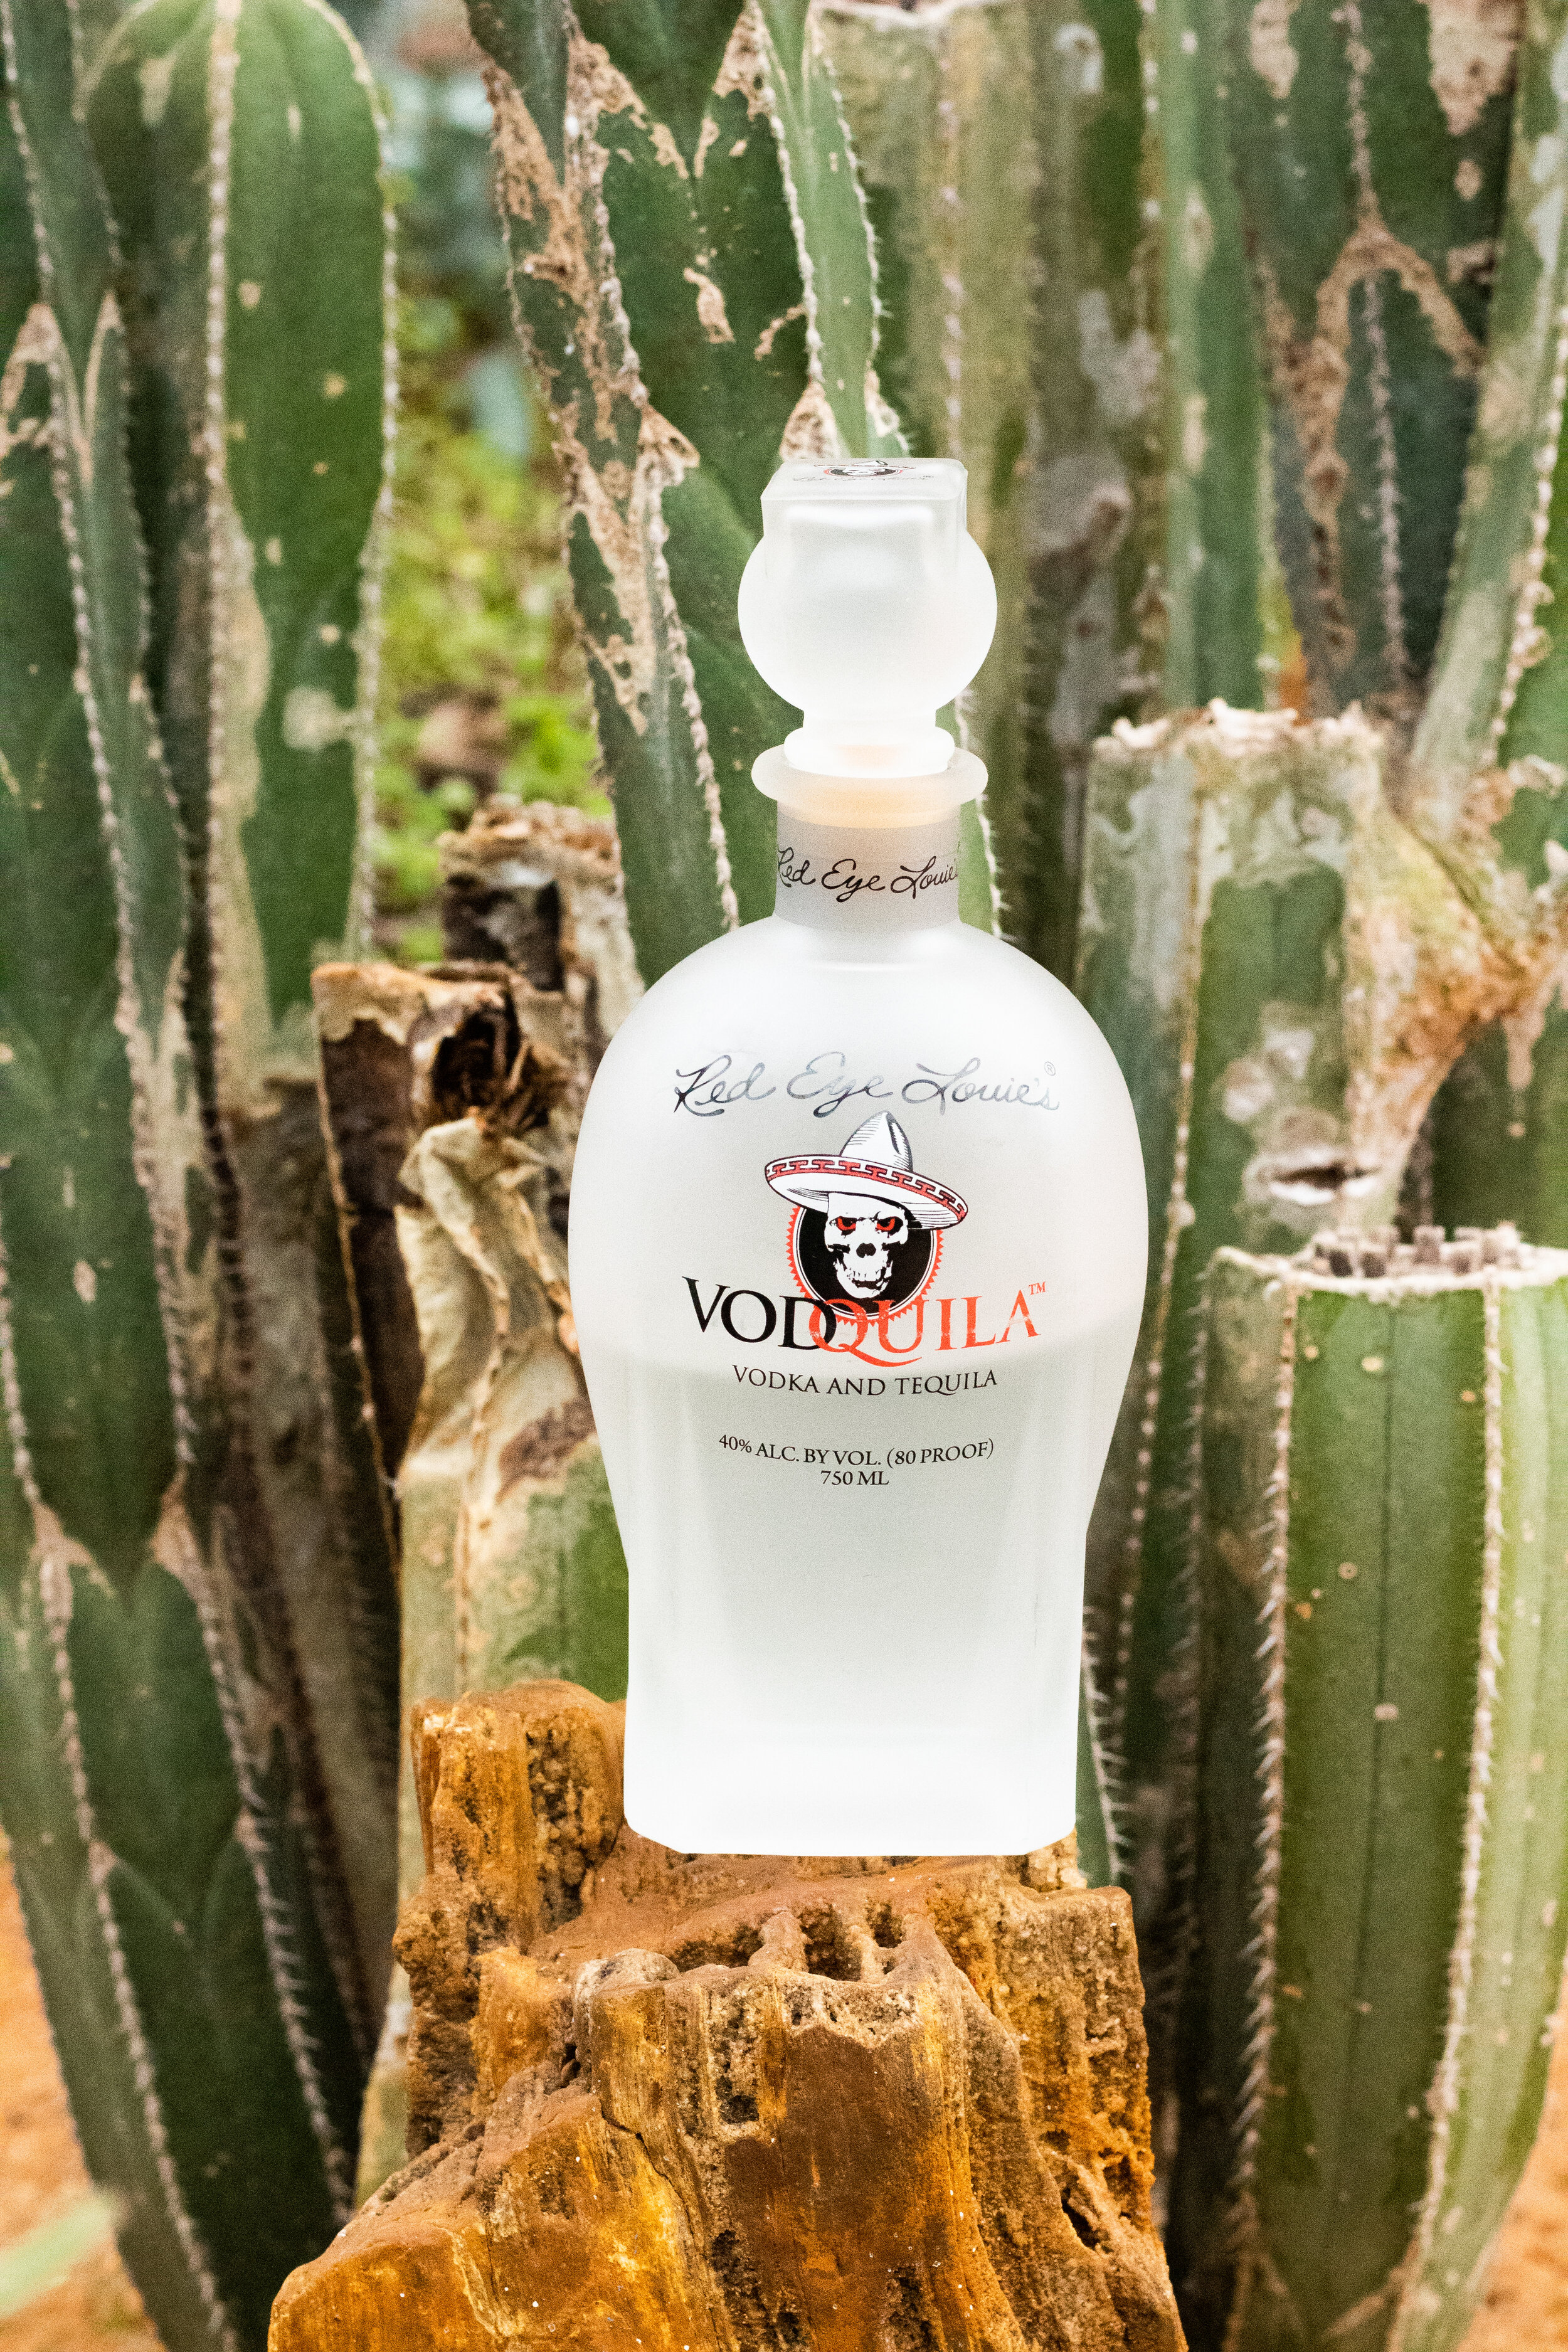 Vodquila - With Red Eye Louie’s Vodquila, you never have to choose, never have to compromise. It’s the perfect blend of smooth vodka for your refined side combined with just the right amount of tequila naughtiness to fuel your wild side. Next time you’re ready to mix it up, party with Vodquila.